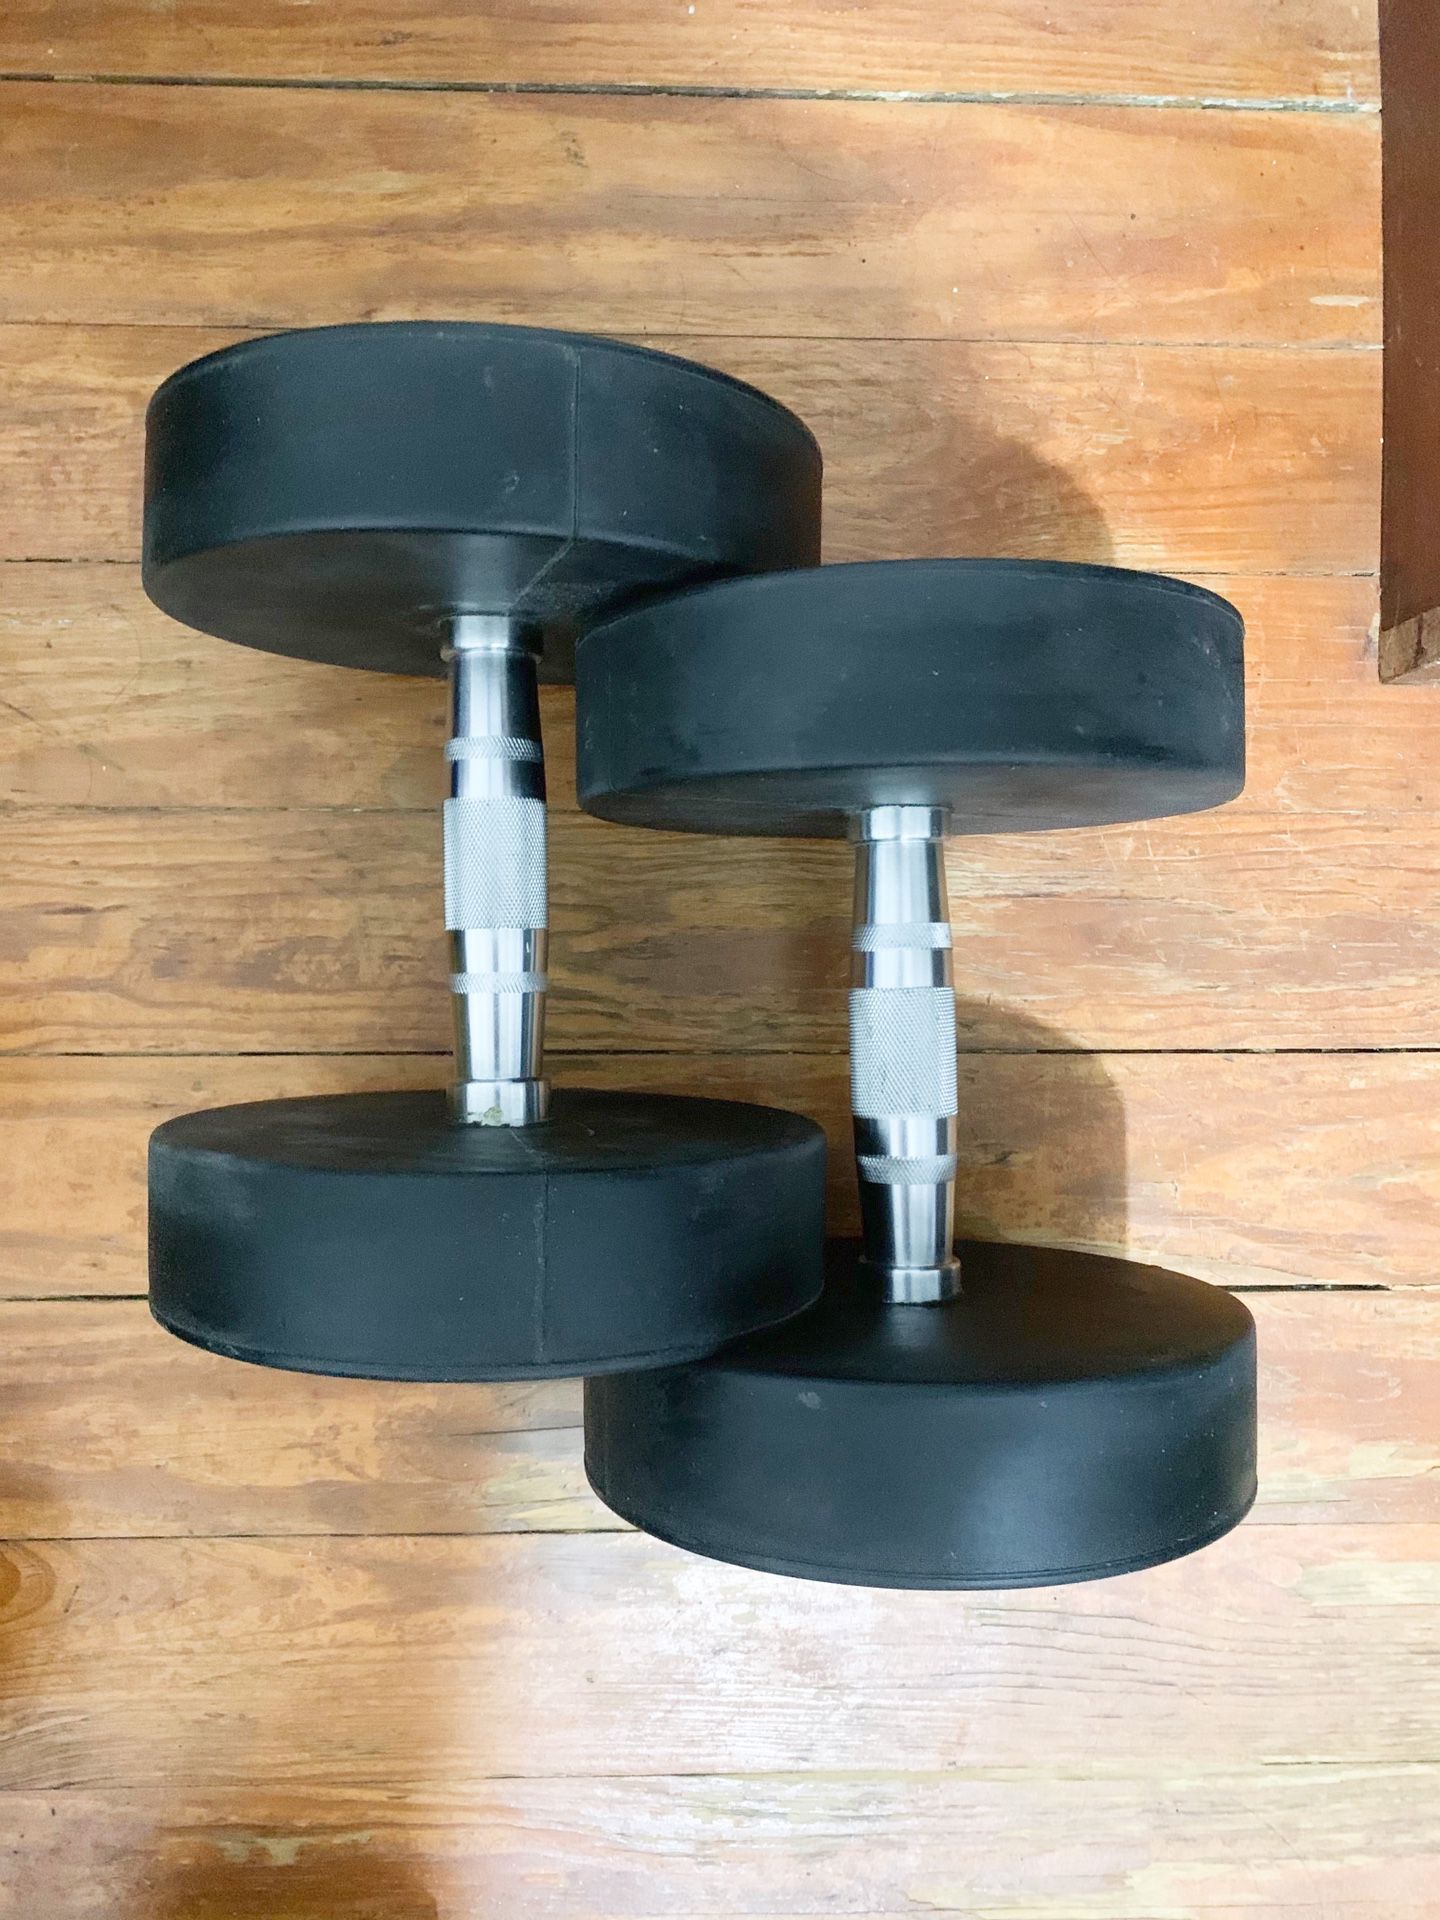 Power Systems 35lbs dumbbell set